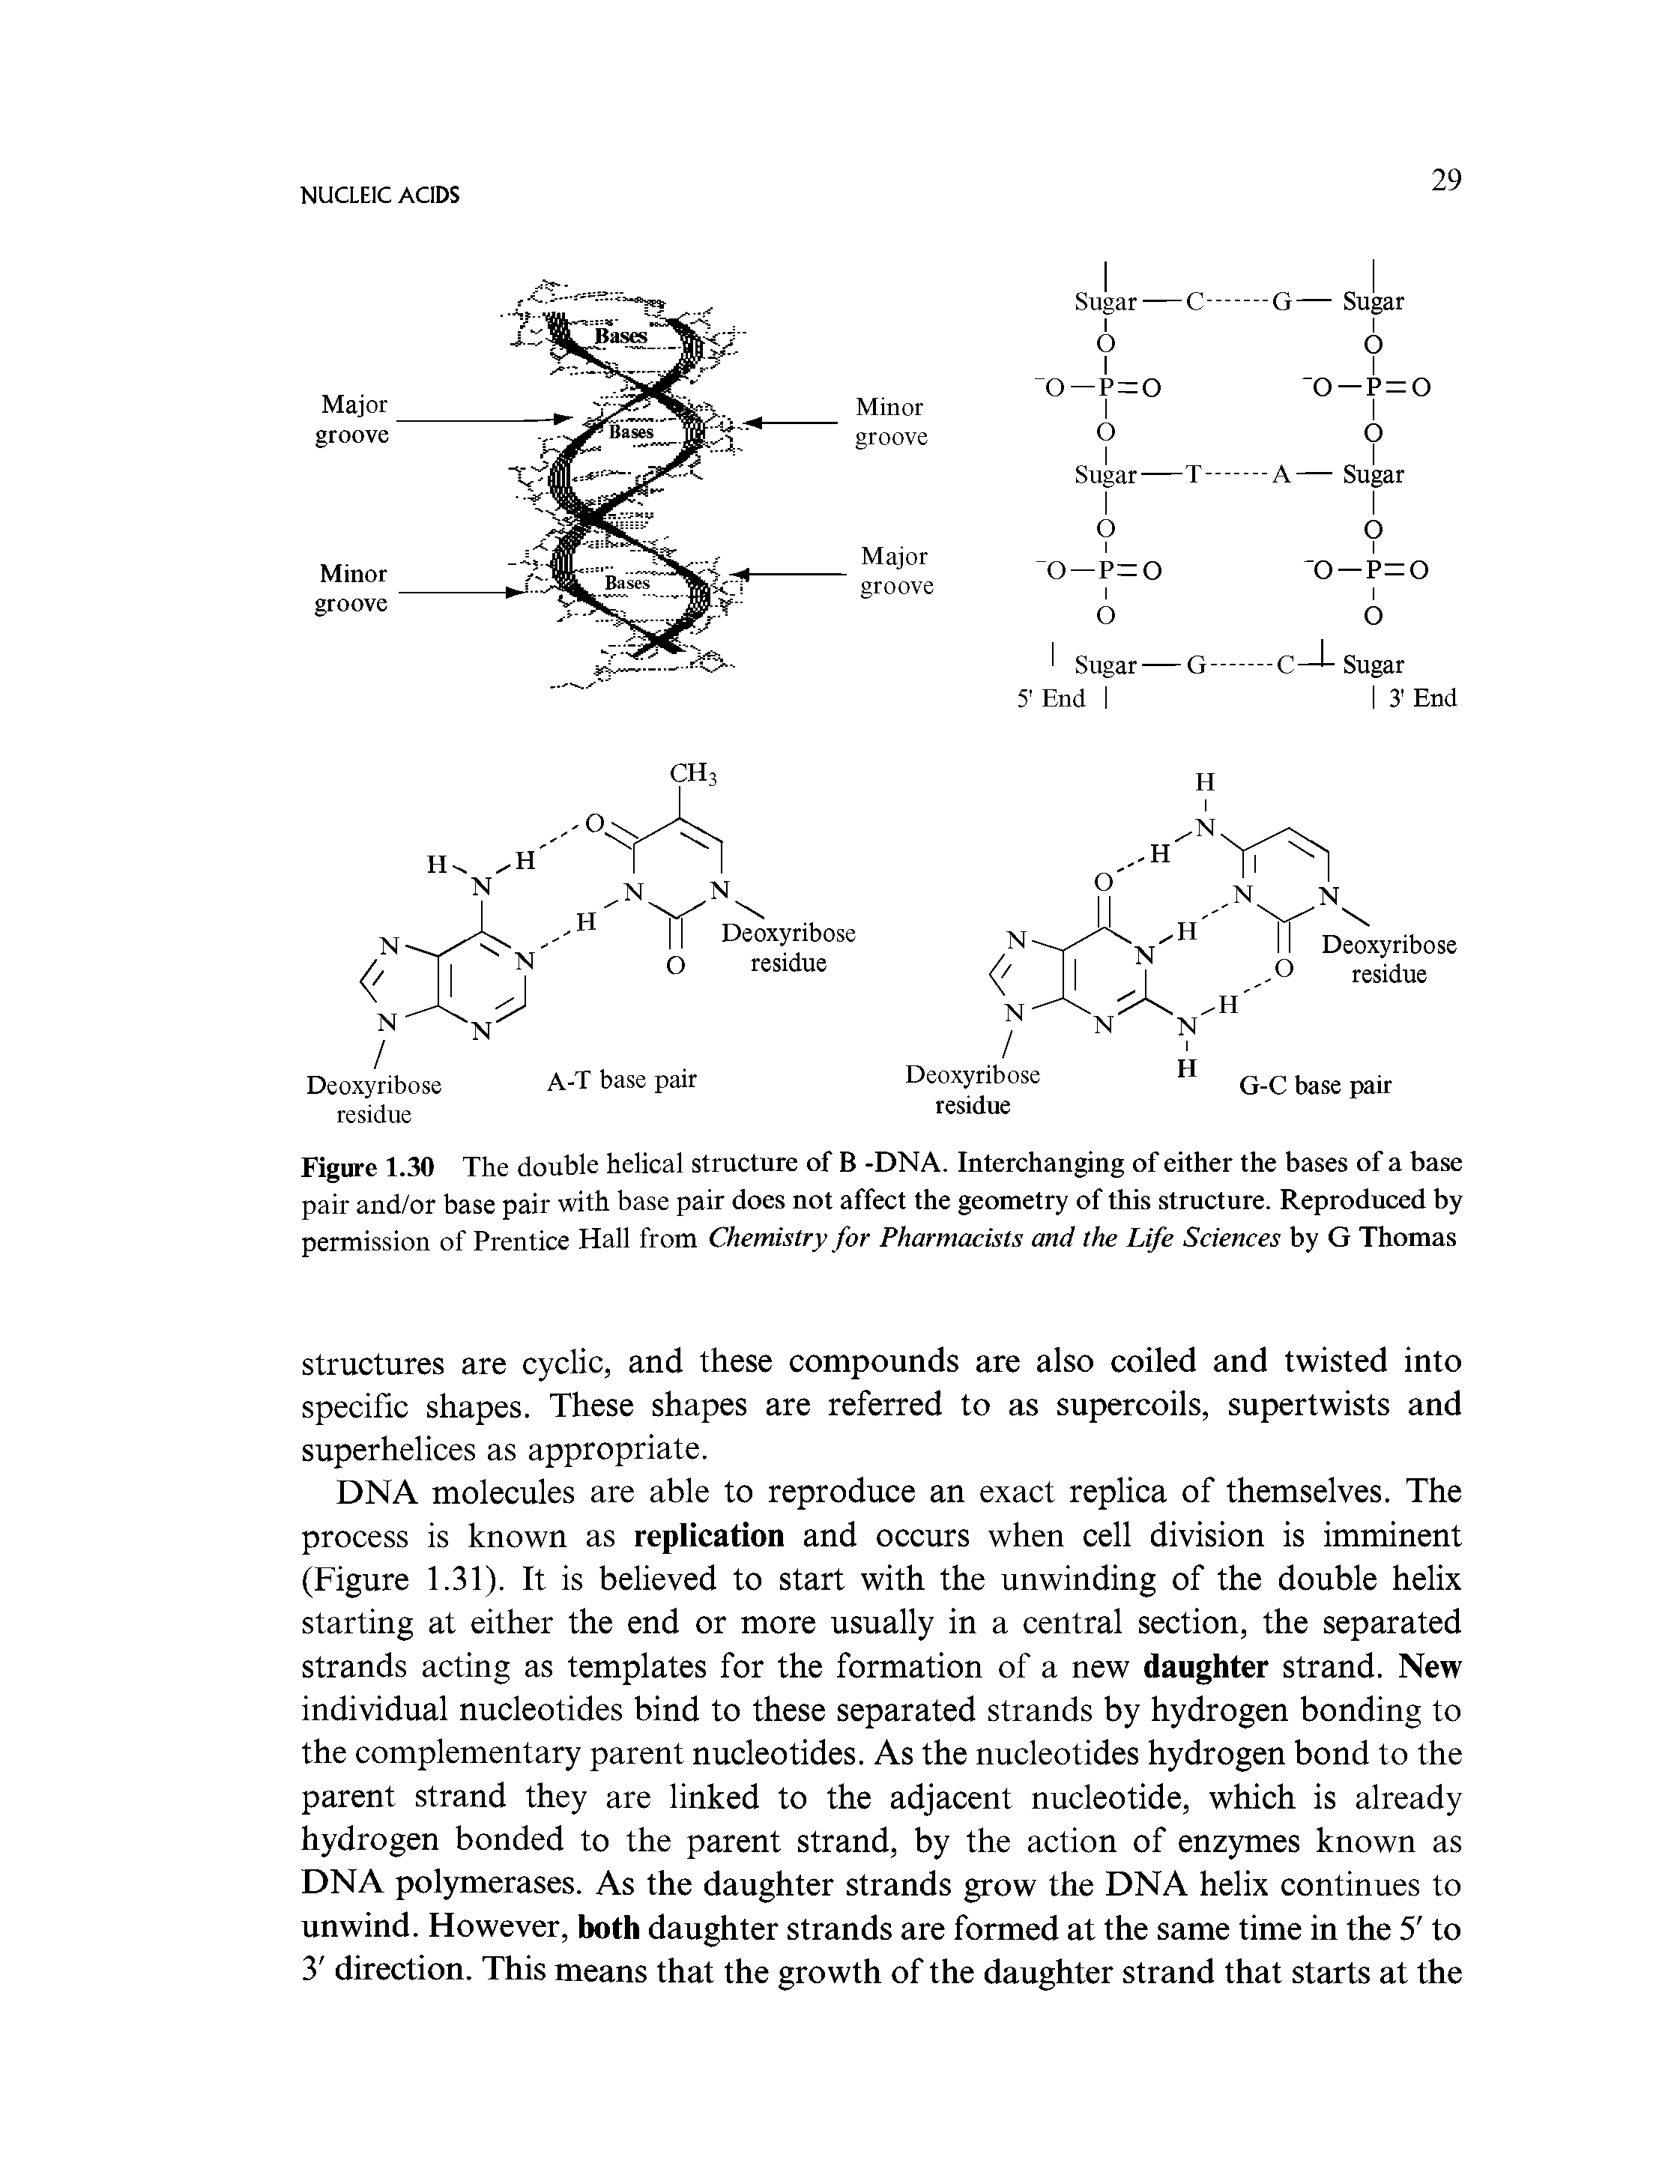 Figure 1.30 The double helical structure of B -DNA. Interchanging of either the bases of a base pair and/or base pair with base pair does not affect the geometry of this structure. Reproduced by permission of Prentice Hall from Chemistry for Pharmacists and the Life Sciences by G Thomas...